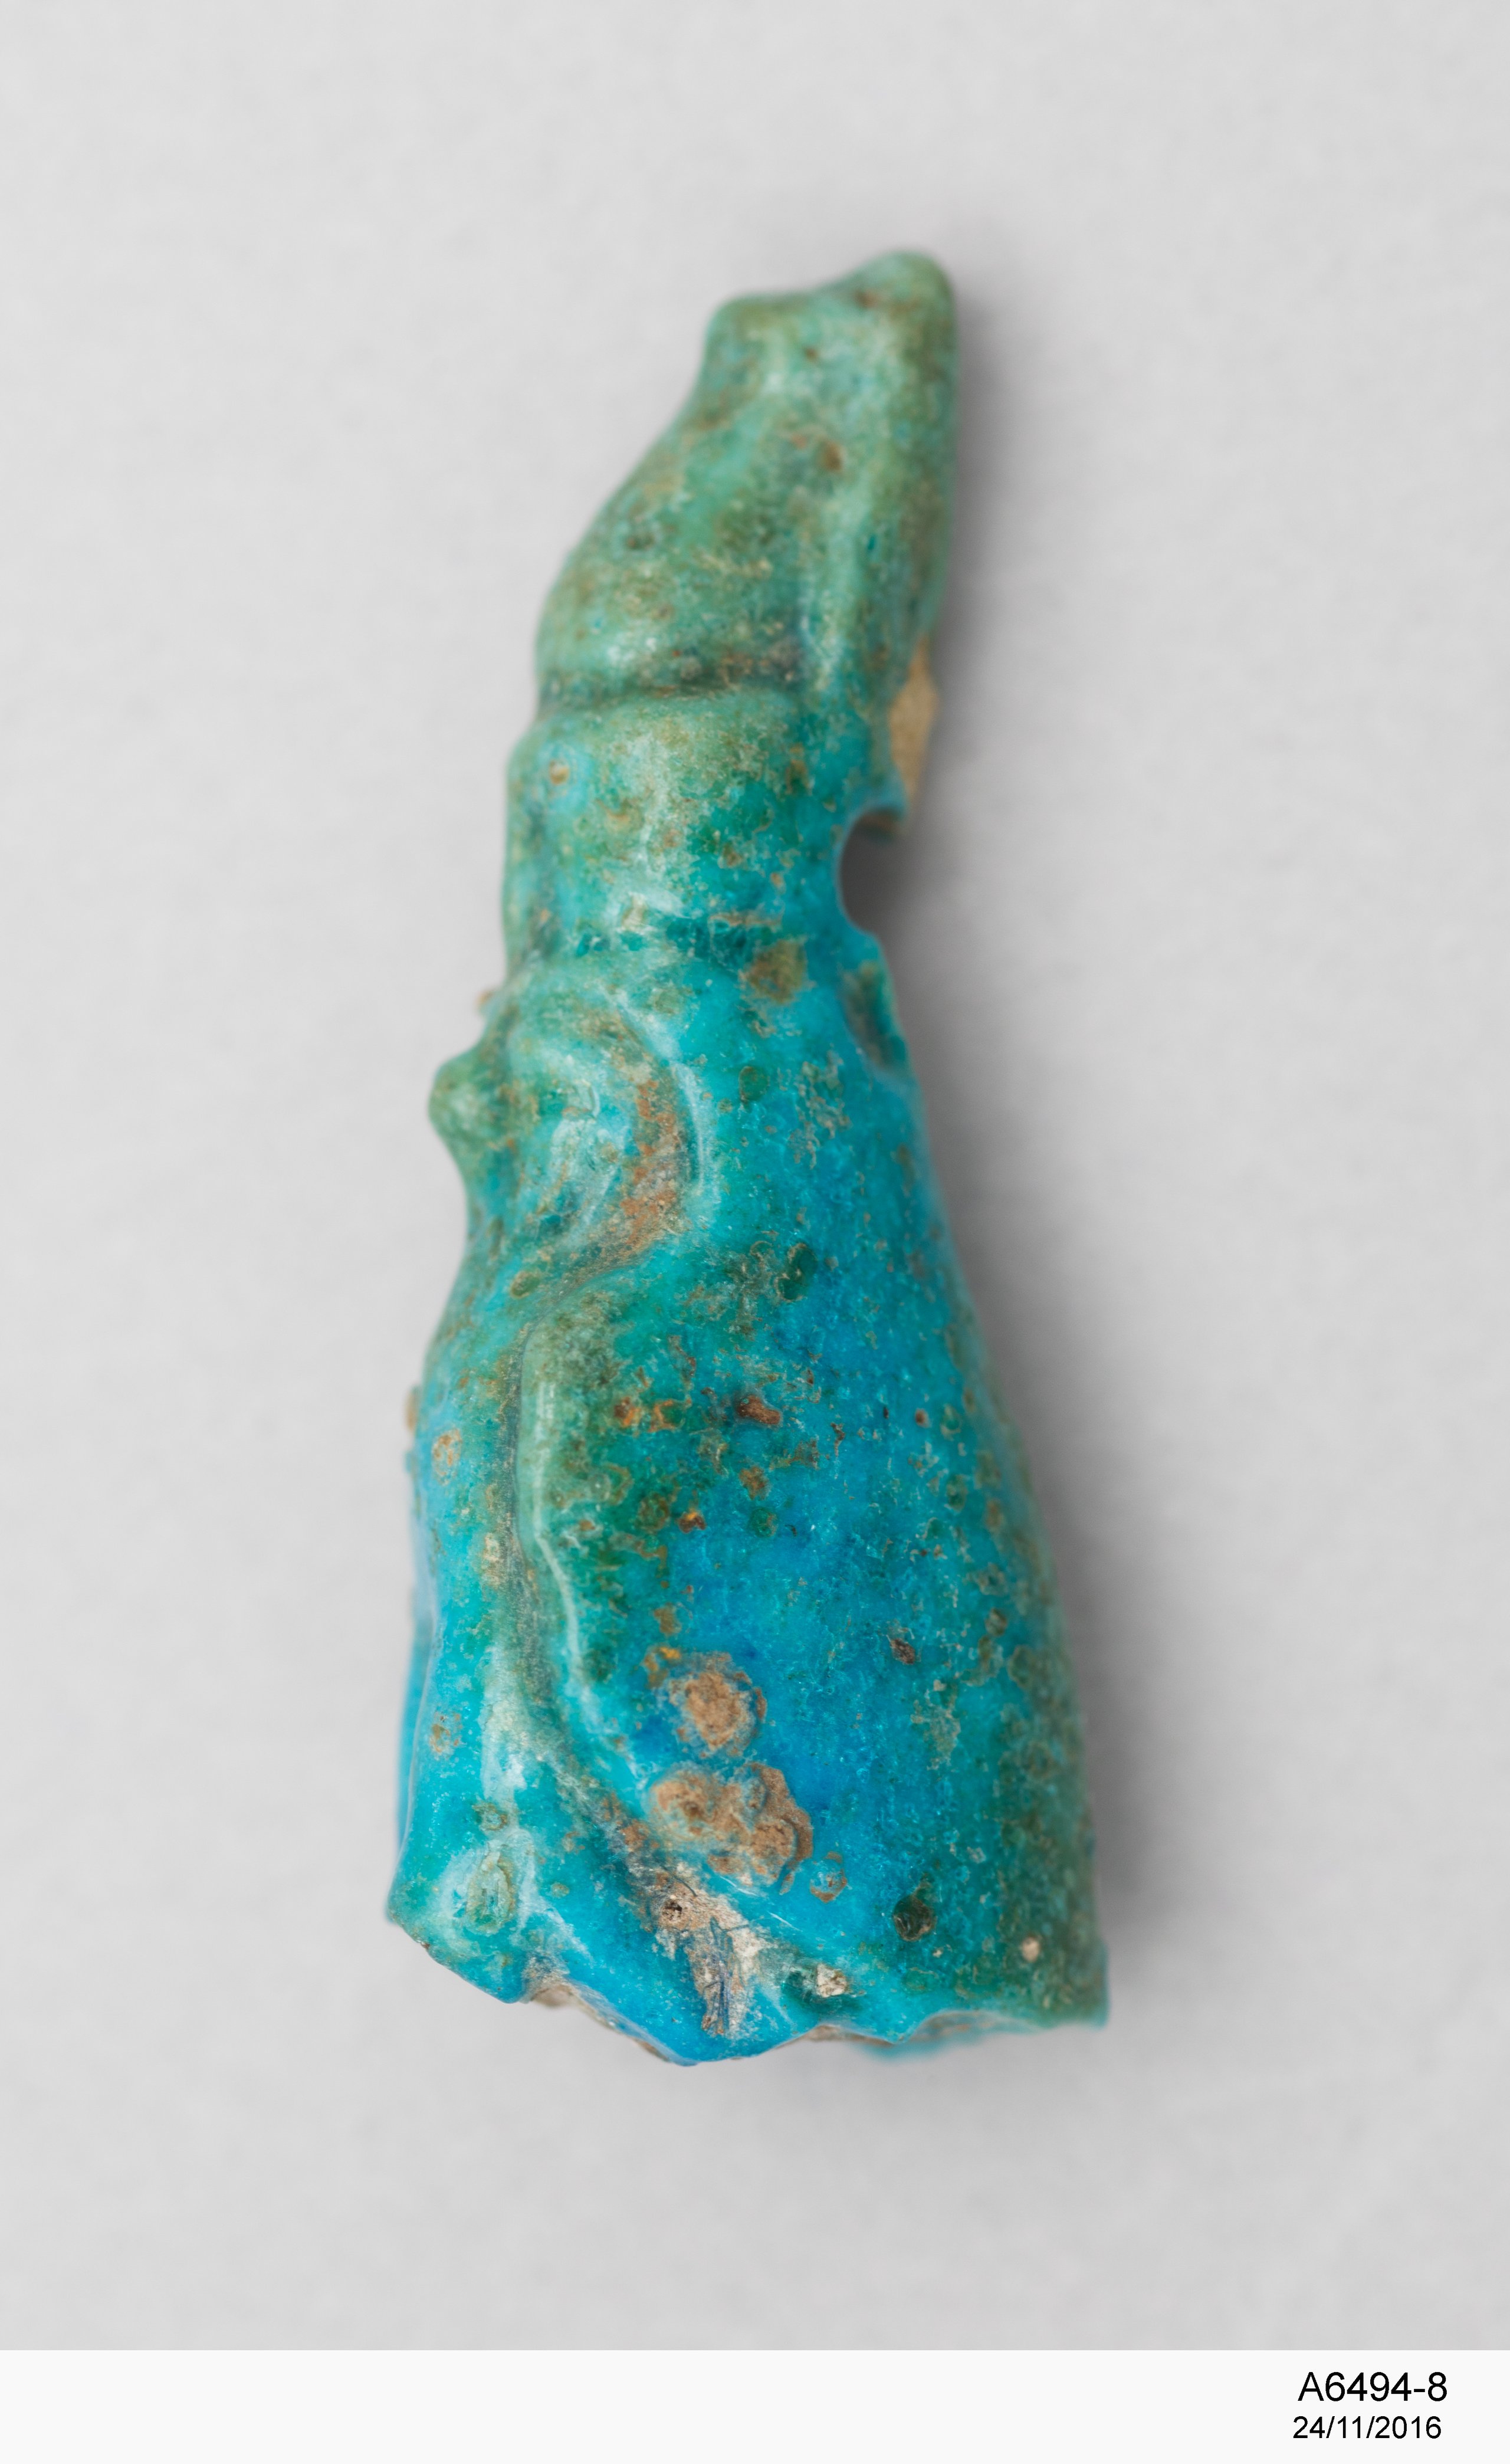 Faience amulet of Horus from Egypt